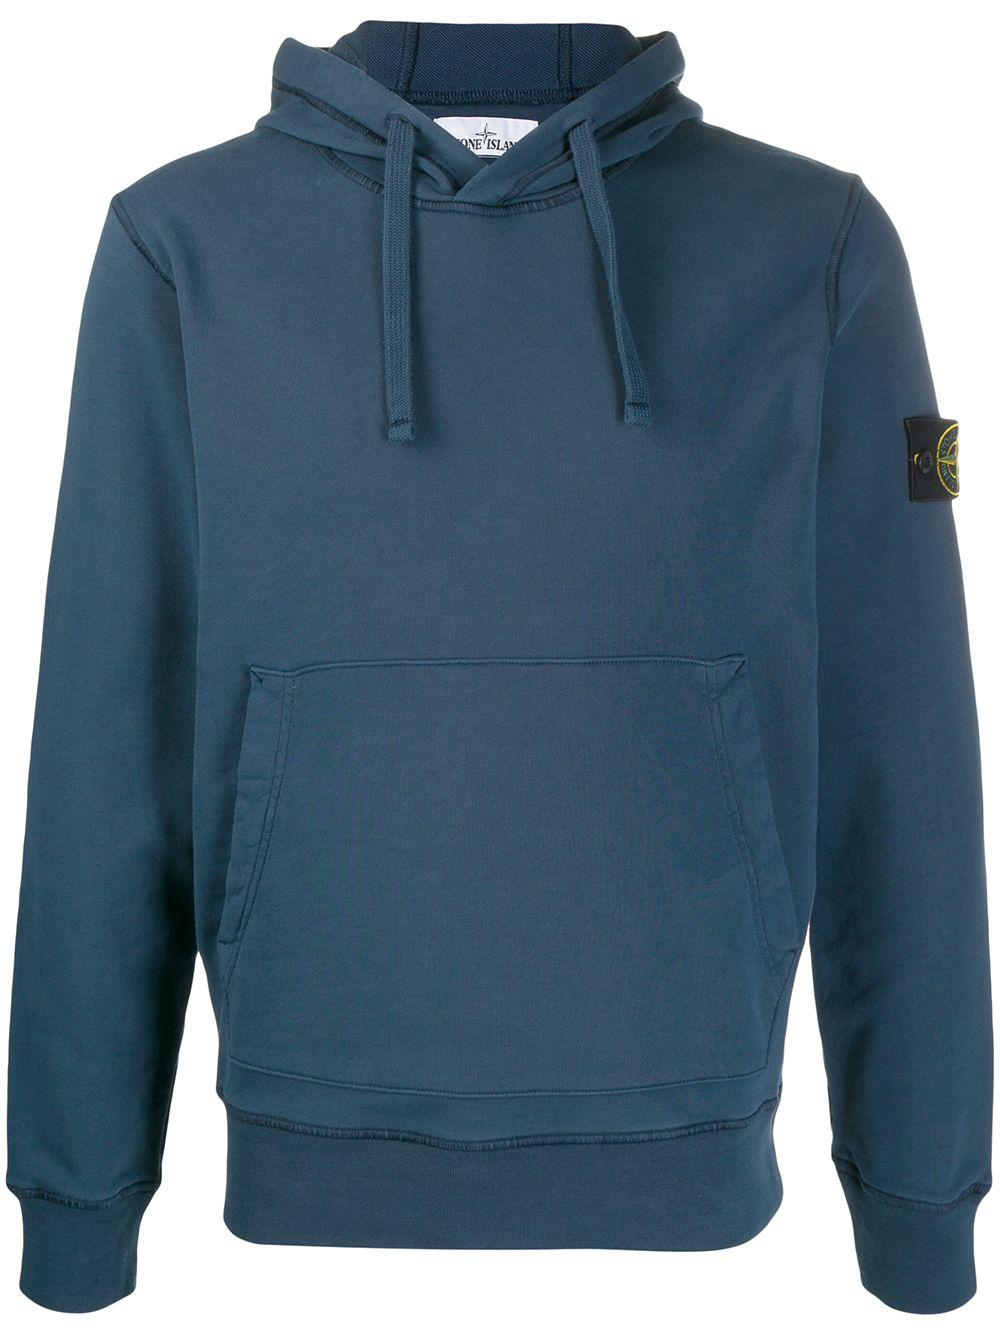 Stone Island Cotton Logo Patch Hoodie in Blue for Men - Lyst